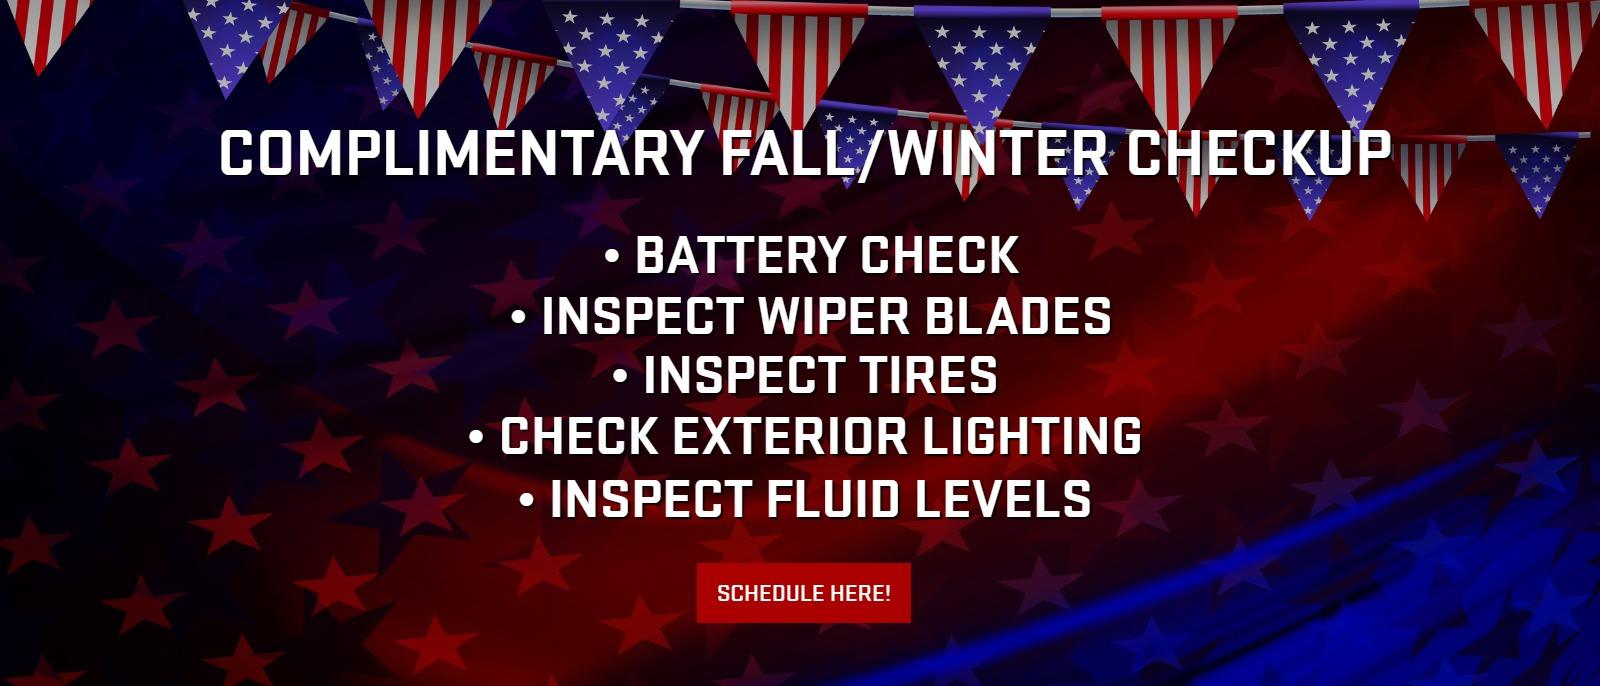 COMPLIMENTARY FALL/WINTER CHECKUP
 • BATTERY CHECK • INSPECT WIPER BLADES • INSPECT TIRES • CHECK EXTERIOR LIGHTING • INSPECT FLUID LEVELS